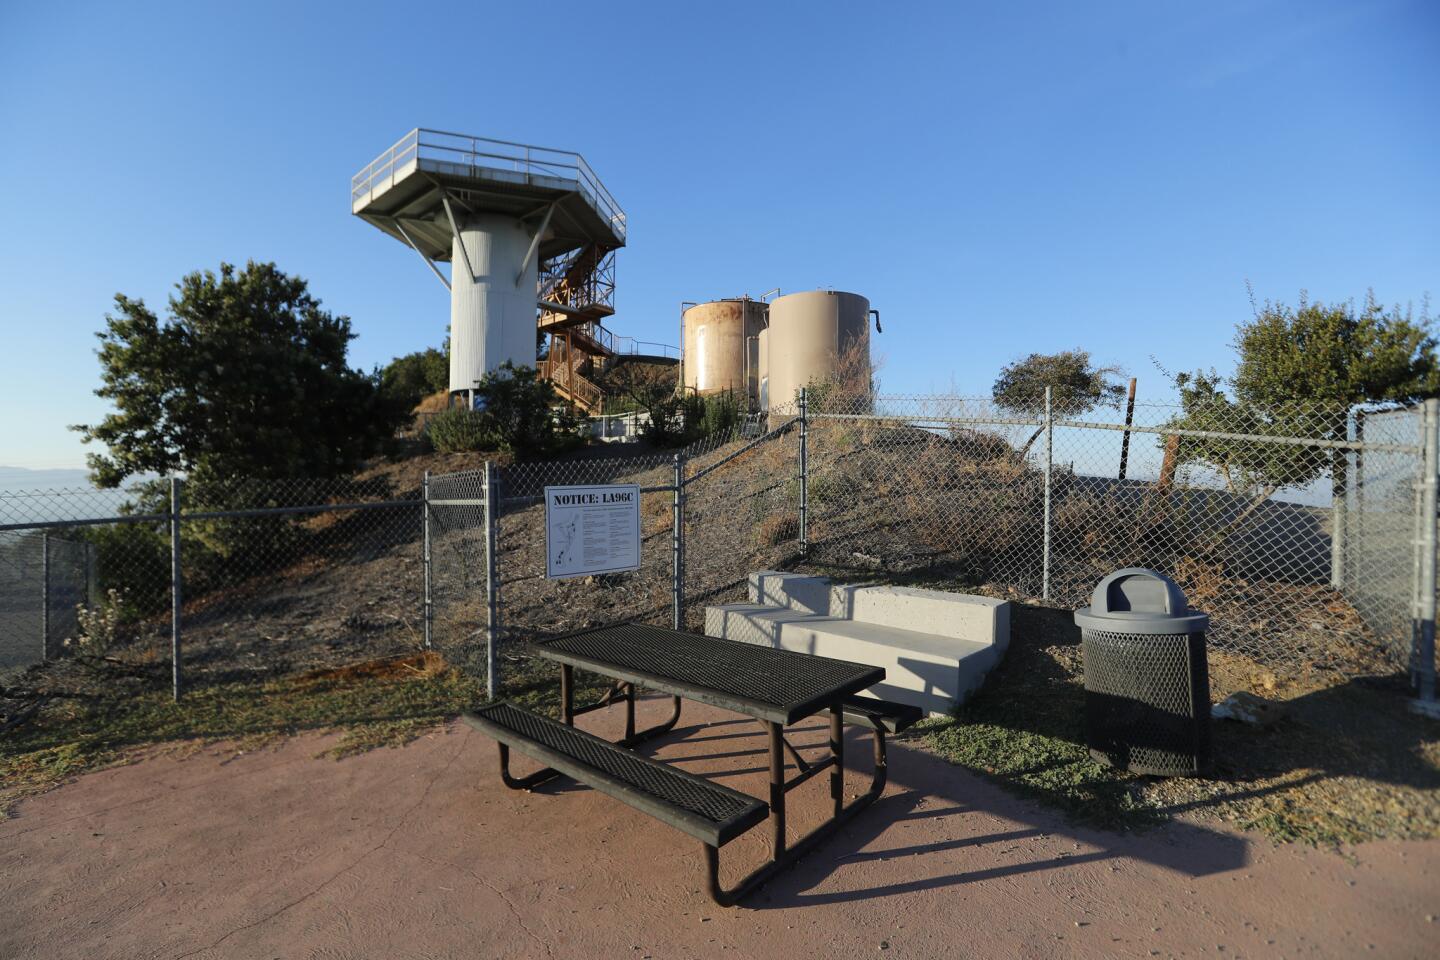 Take a stroll around L.A.'s defunct missile system and enjoy the panoramic view in Mulholland Drive